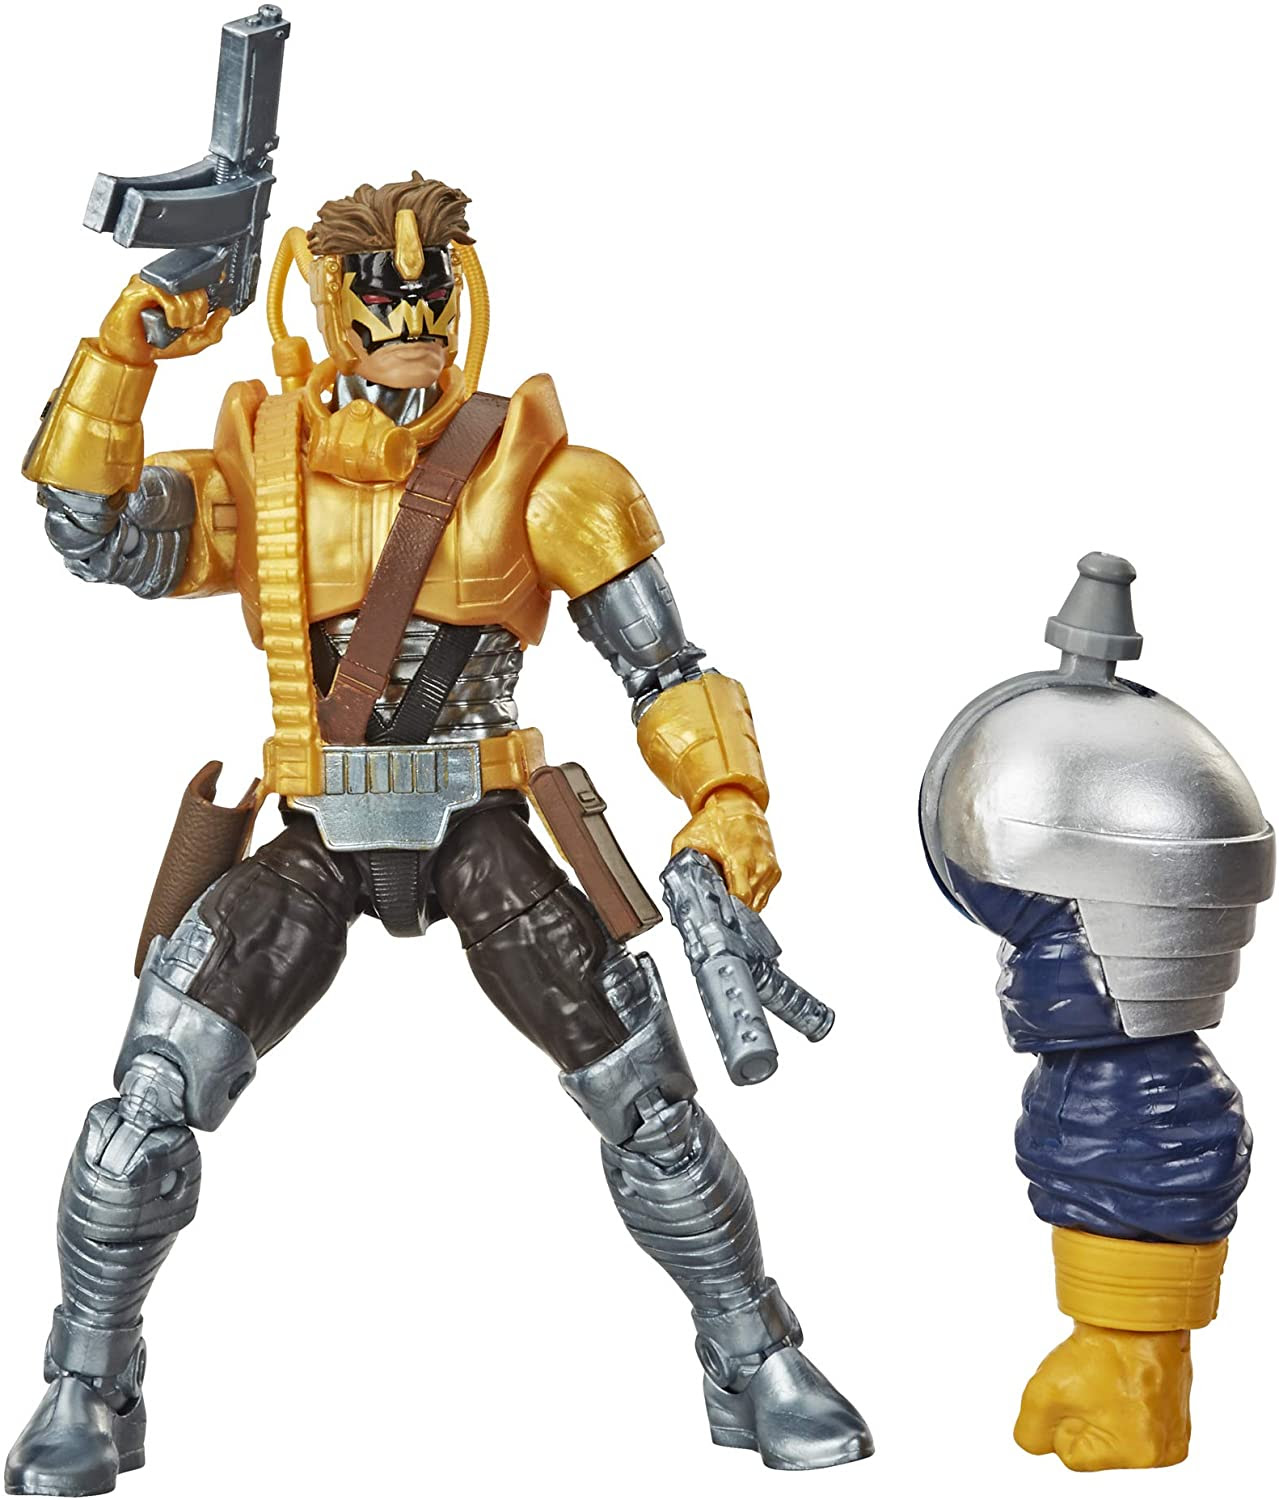 Image of Hasbro Marvel Legends Series Deadpool Collection 6-inch Marvel’s Maverick Action Figure Toy Premium Design and 2 Accessories